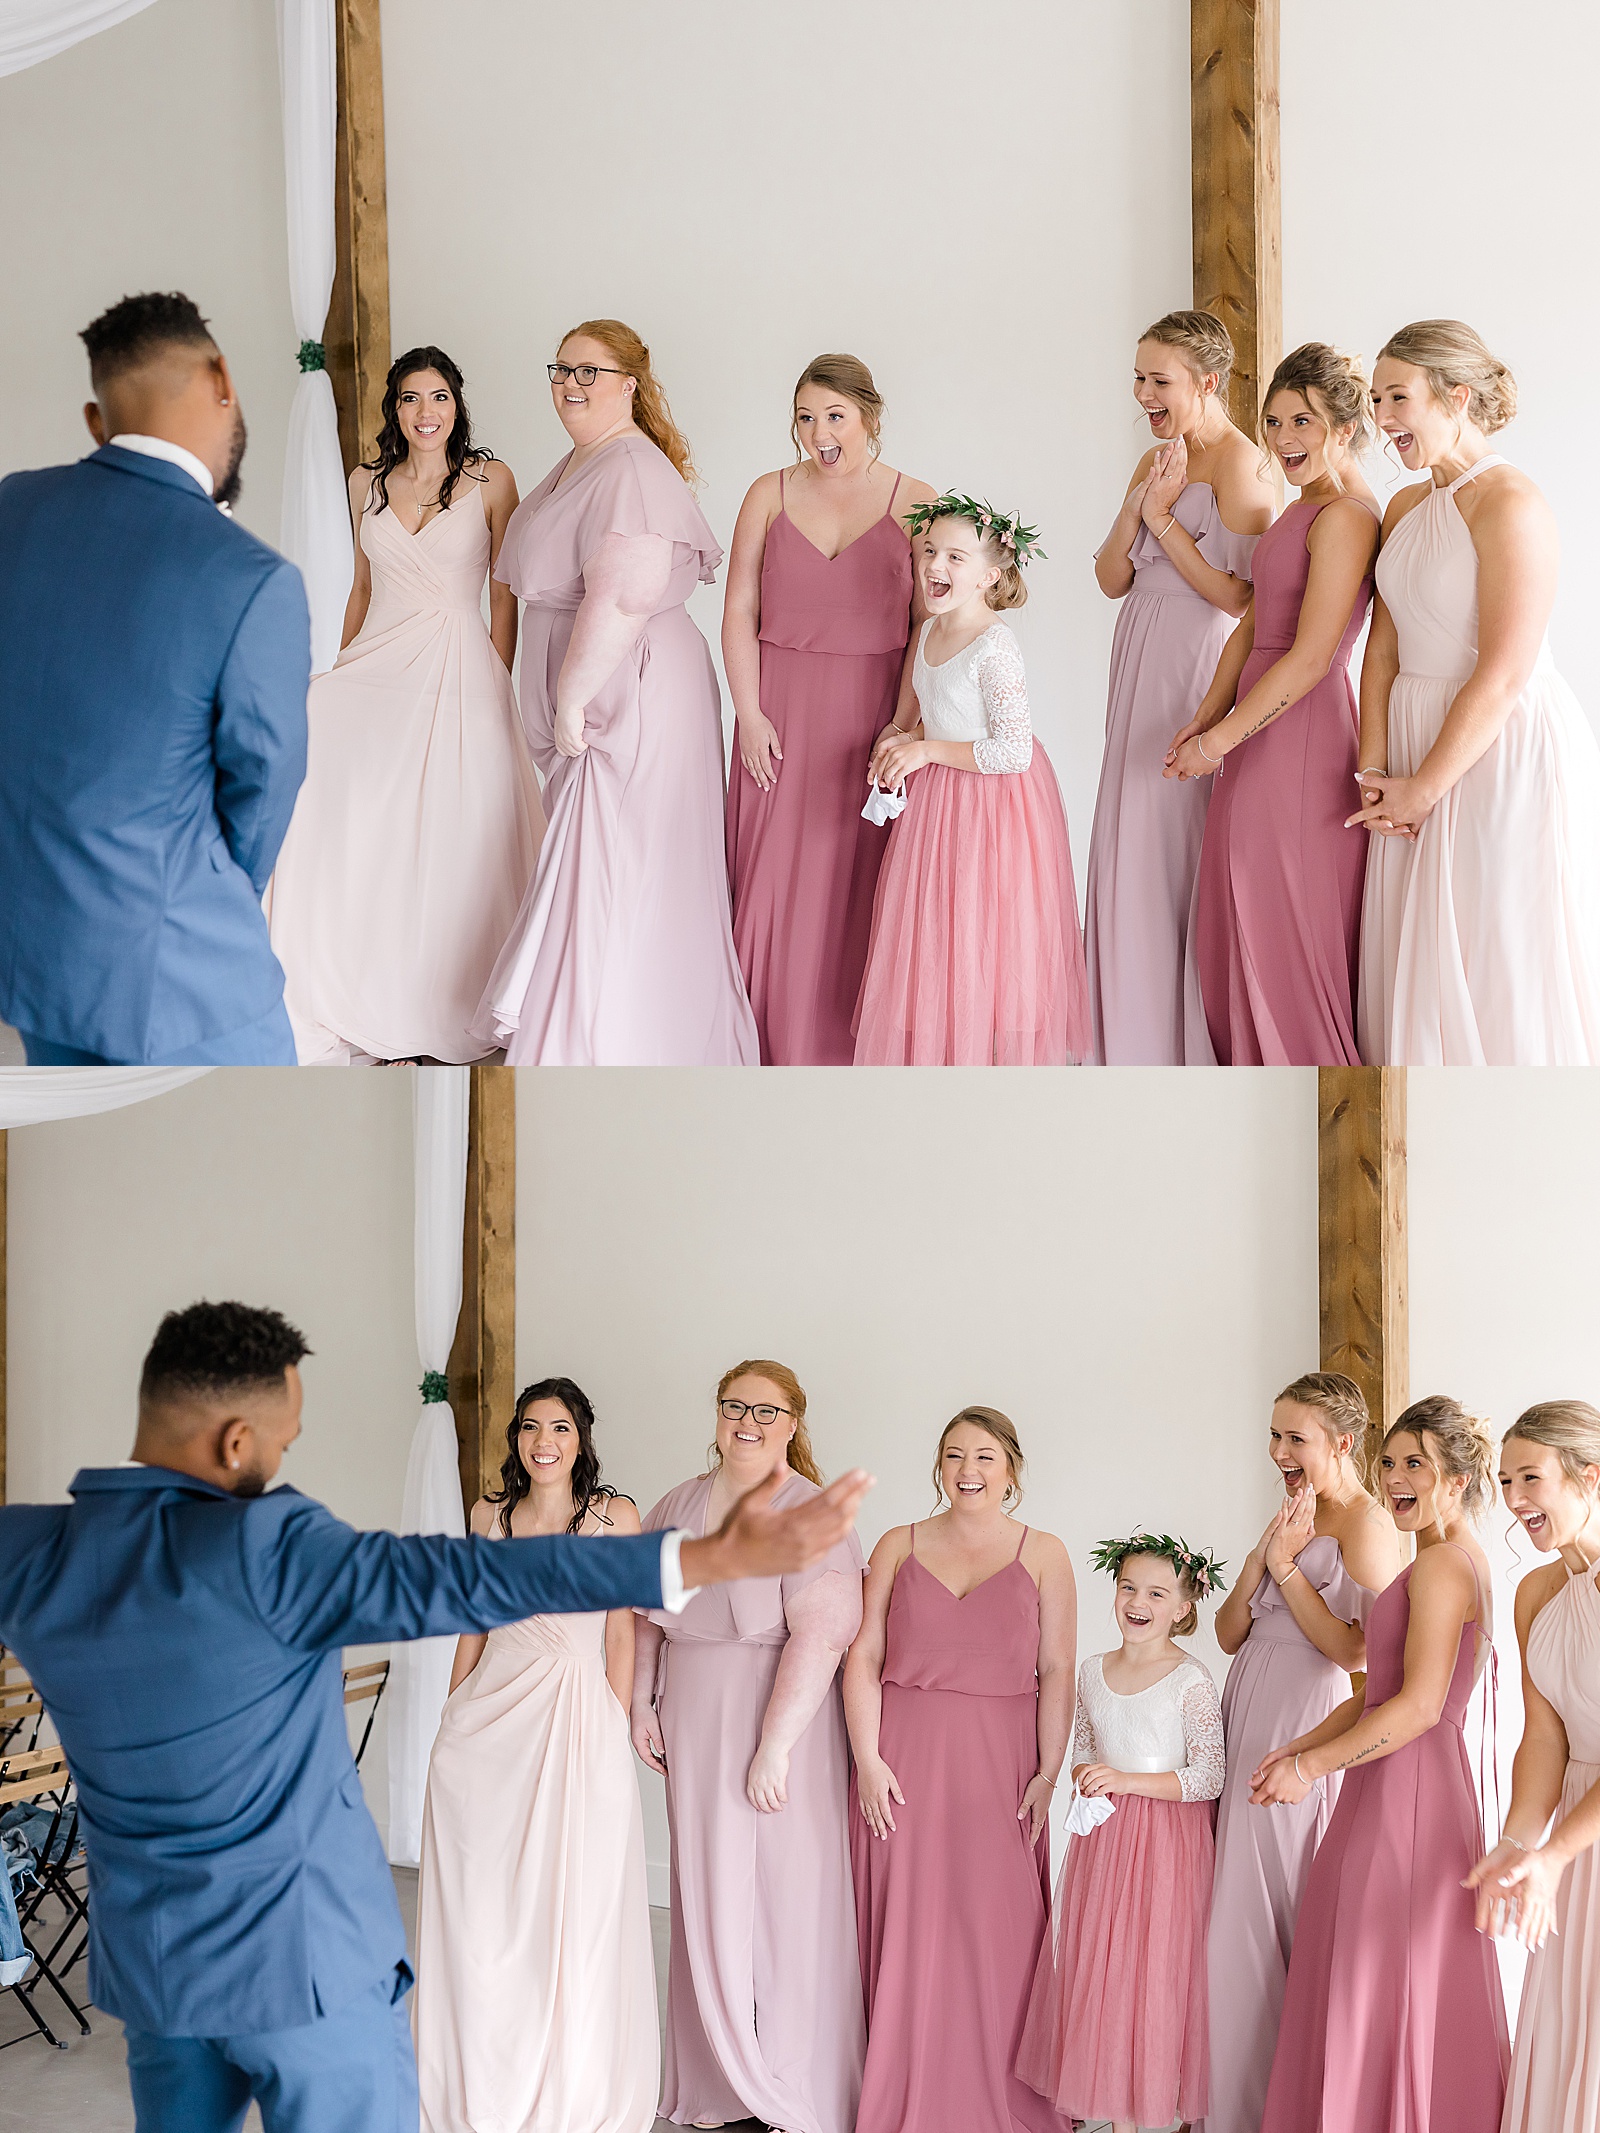 Groom doing a reveal with bridesmaids for Minnesota wedding